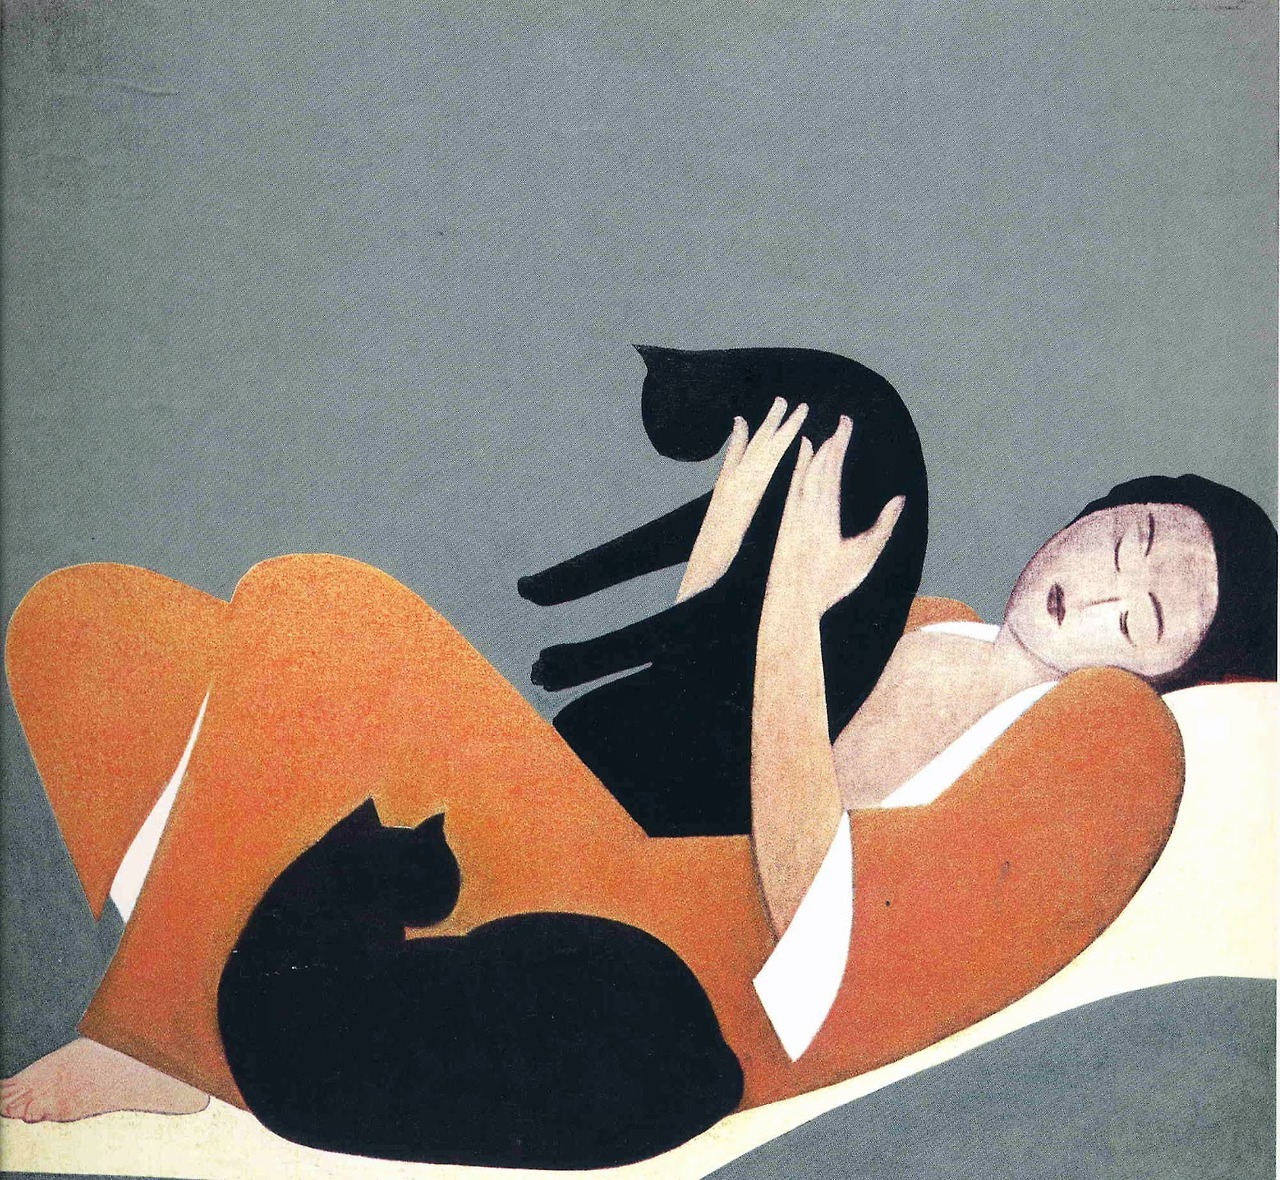 redlipstickresurrected:
â€œWill Barnet (American, 1911-2012, b. Beverly, MA, USA) - Woman and Cats, 1969 Color Lithograph
â€